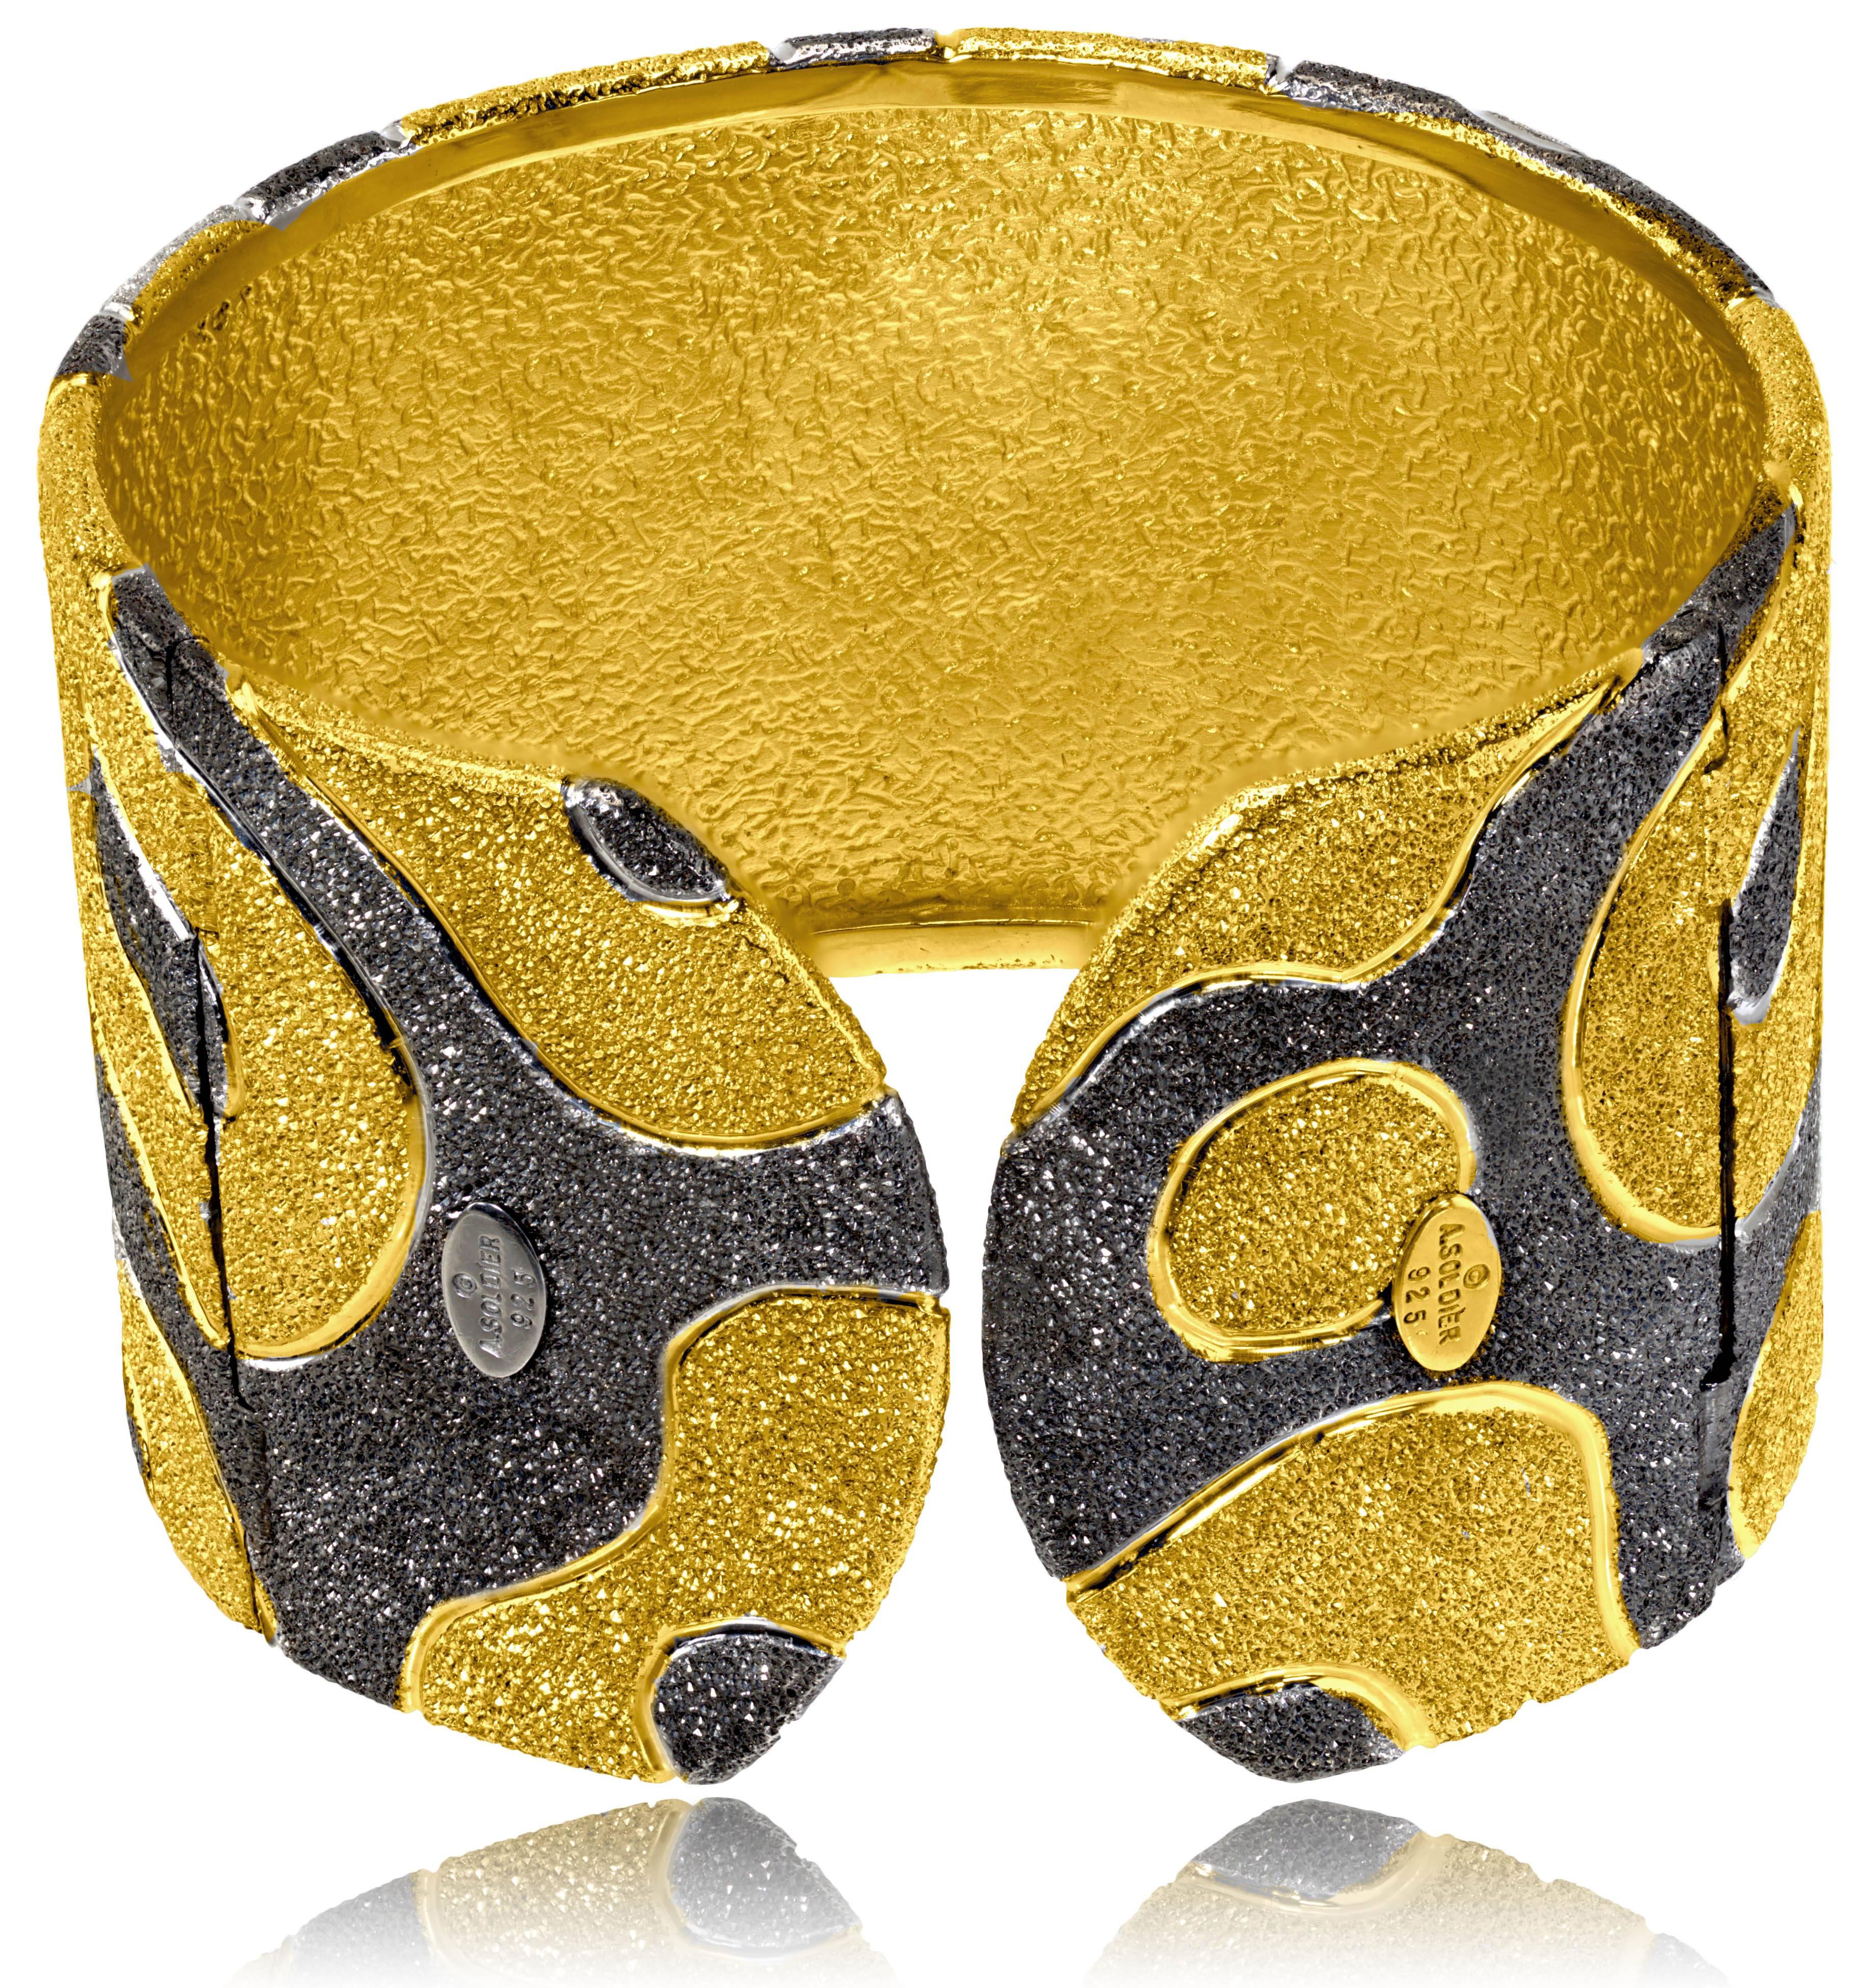 Alex Soldier Cora Cuff: made in silver with 24 karat yellow gold and dark platinum  (rhodium) infusion (deep plating). Handmade in NYC, it features double hinges for extra comfort and is finished with proprietary metalwork that creates an illusion